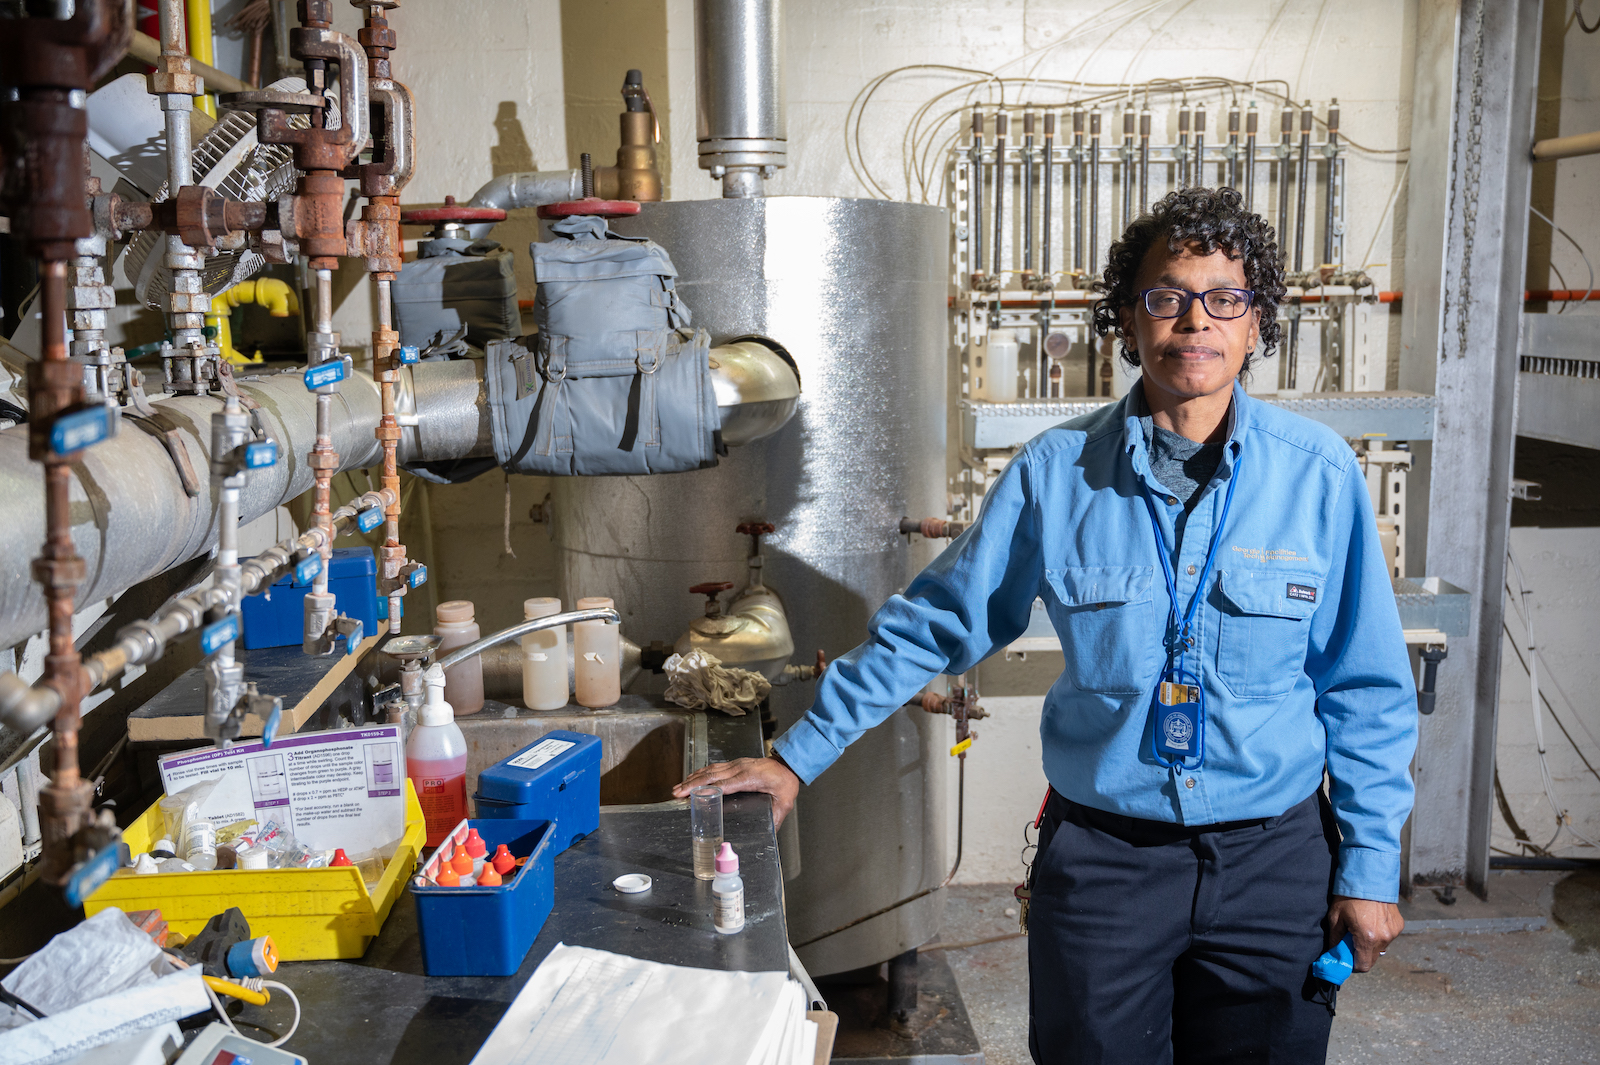 Valerie Edward joined Facilities in March 2019 as a stationary engineer at the Holland Plant. (Photo by Allison Carter)